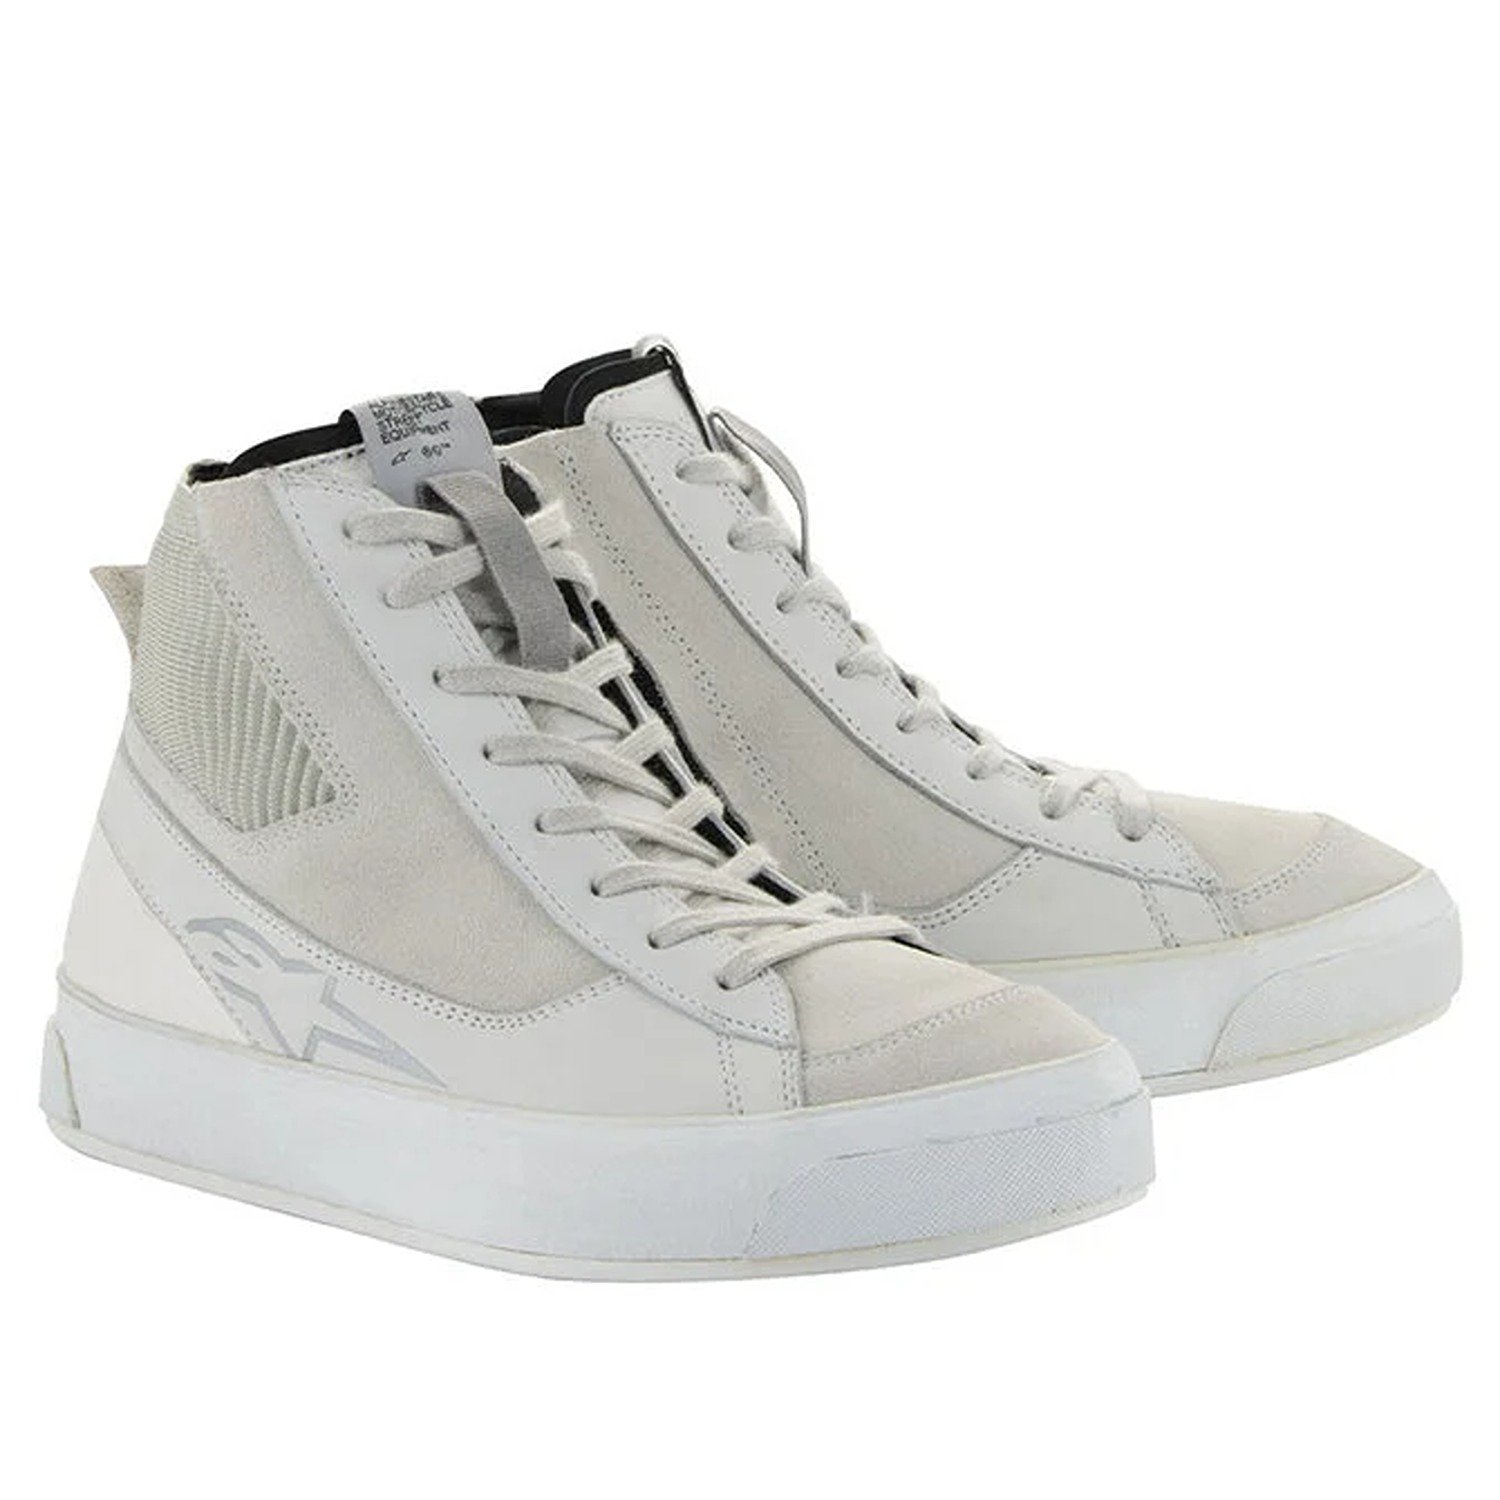 Image of Alpinestars Stated Shoes White Cool Gray Größe US 12